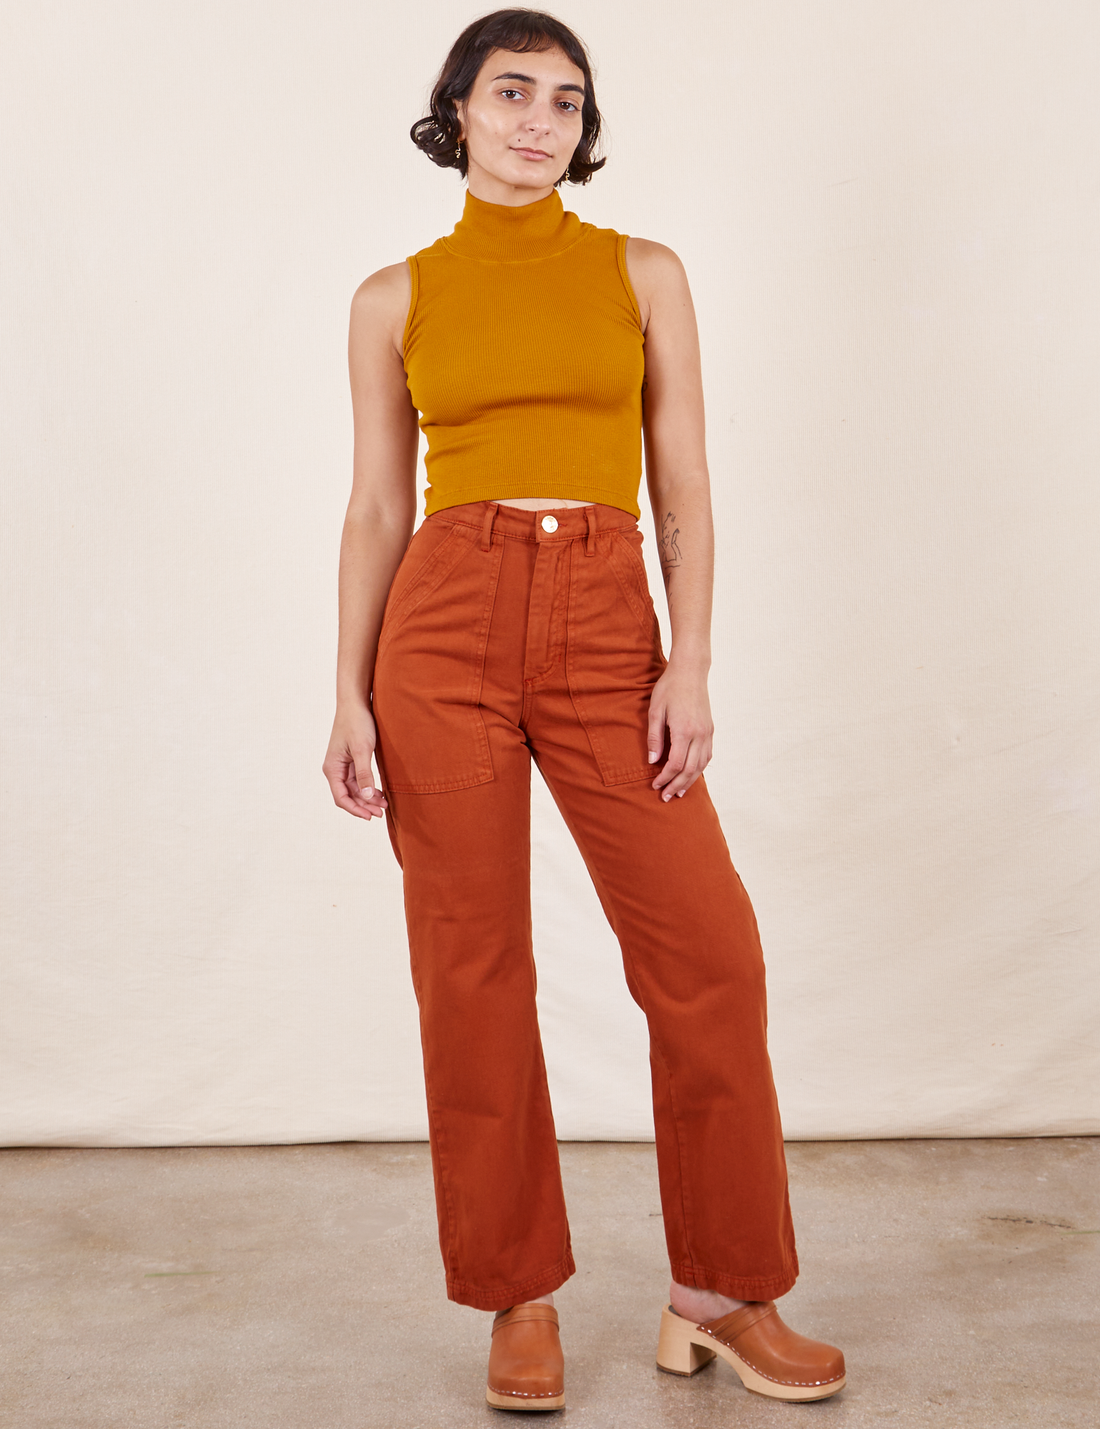 Soraya is 5'2" and wearing Petite XXS Work Pants in Burnt Terracotta paired with Sleeveless Turtleneck in Spicy Mustard